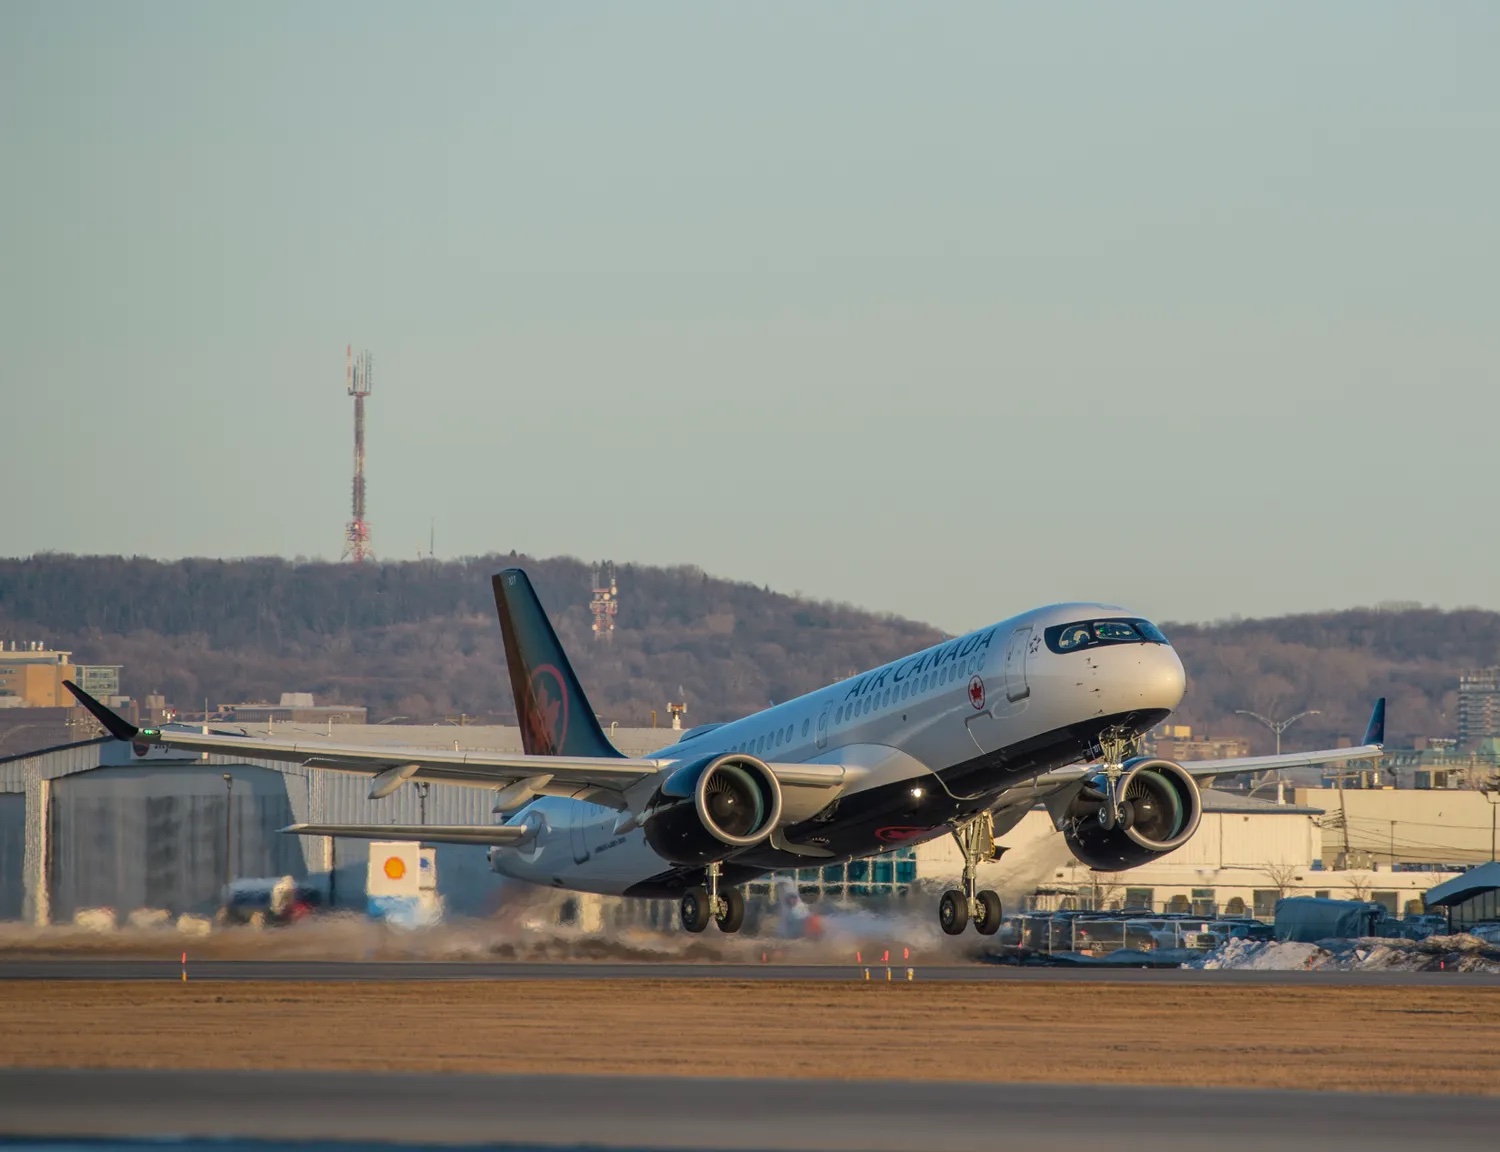 a plane taking off from a runway